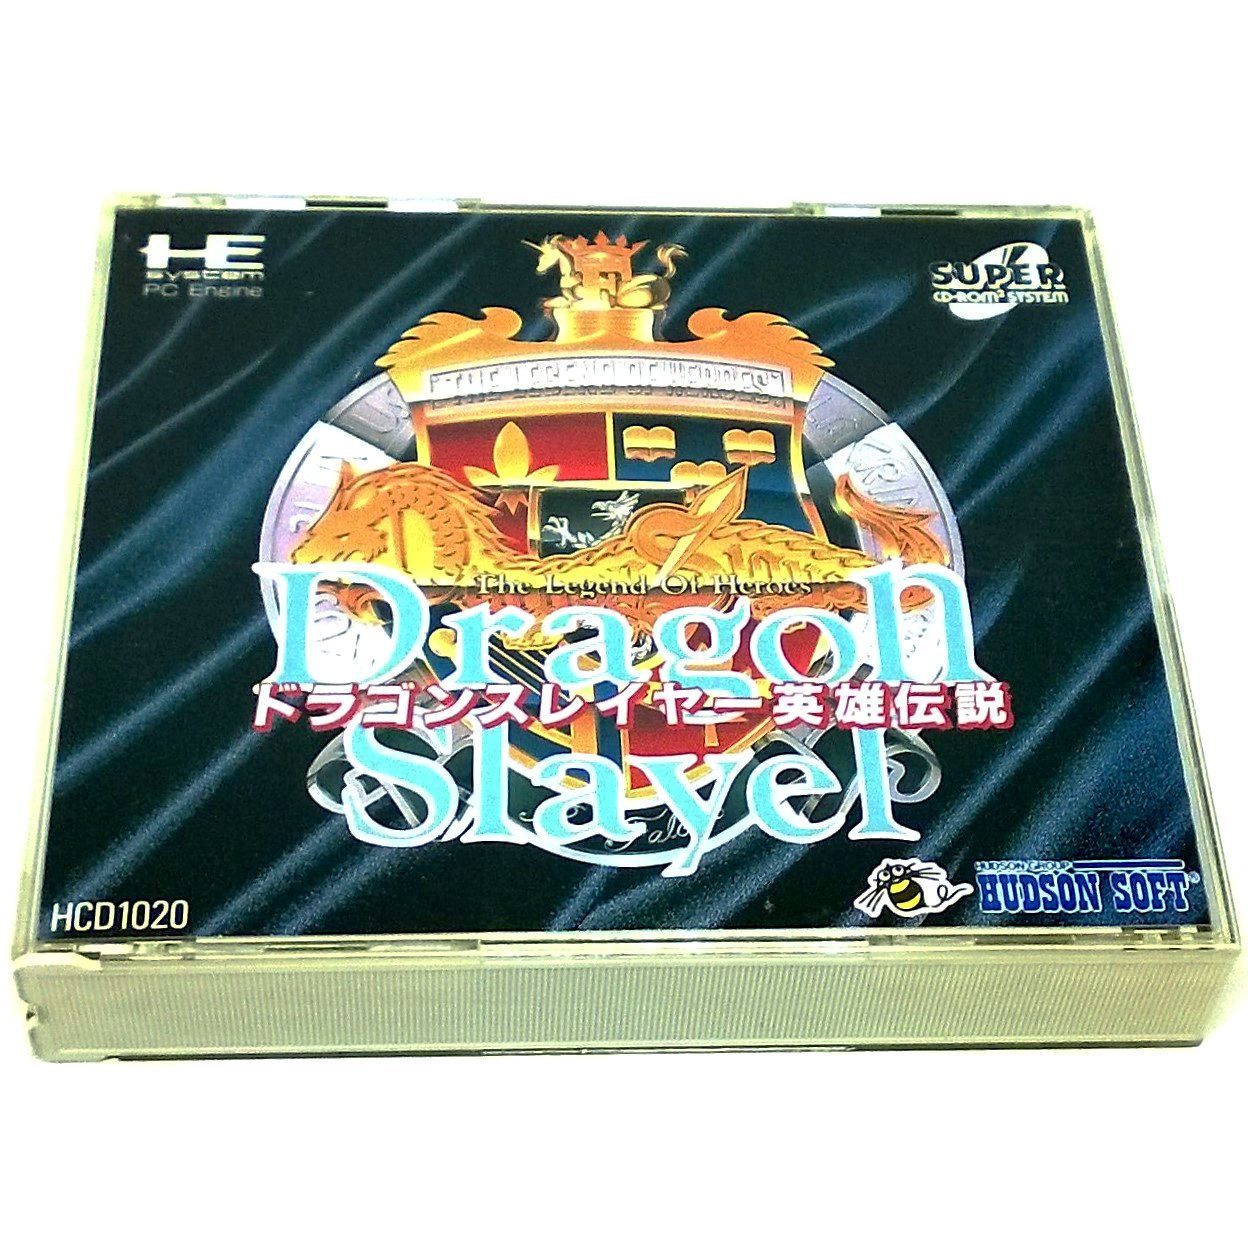 Dragon Slayer: The Legend of Heroes for PC Engine - Front of case